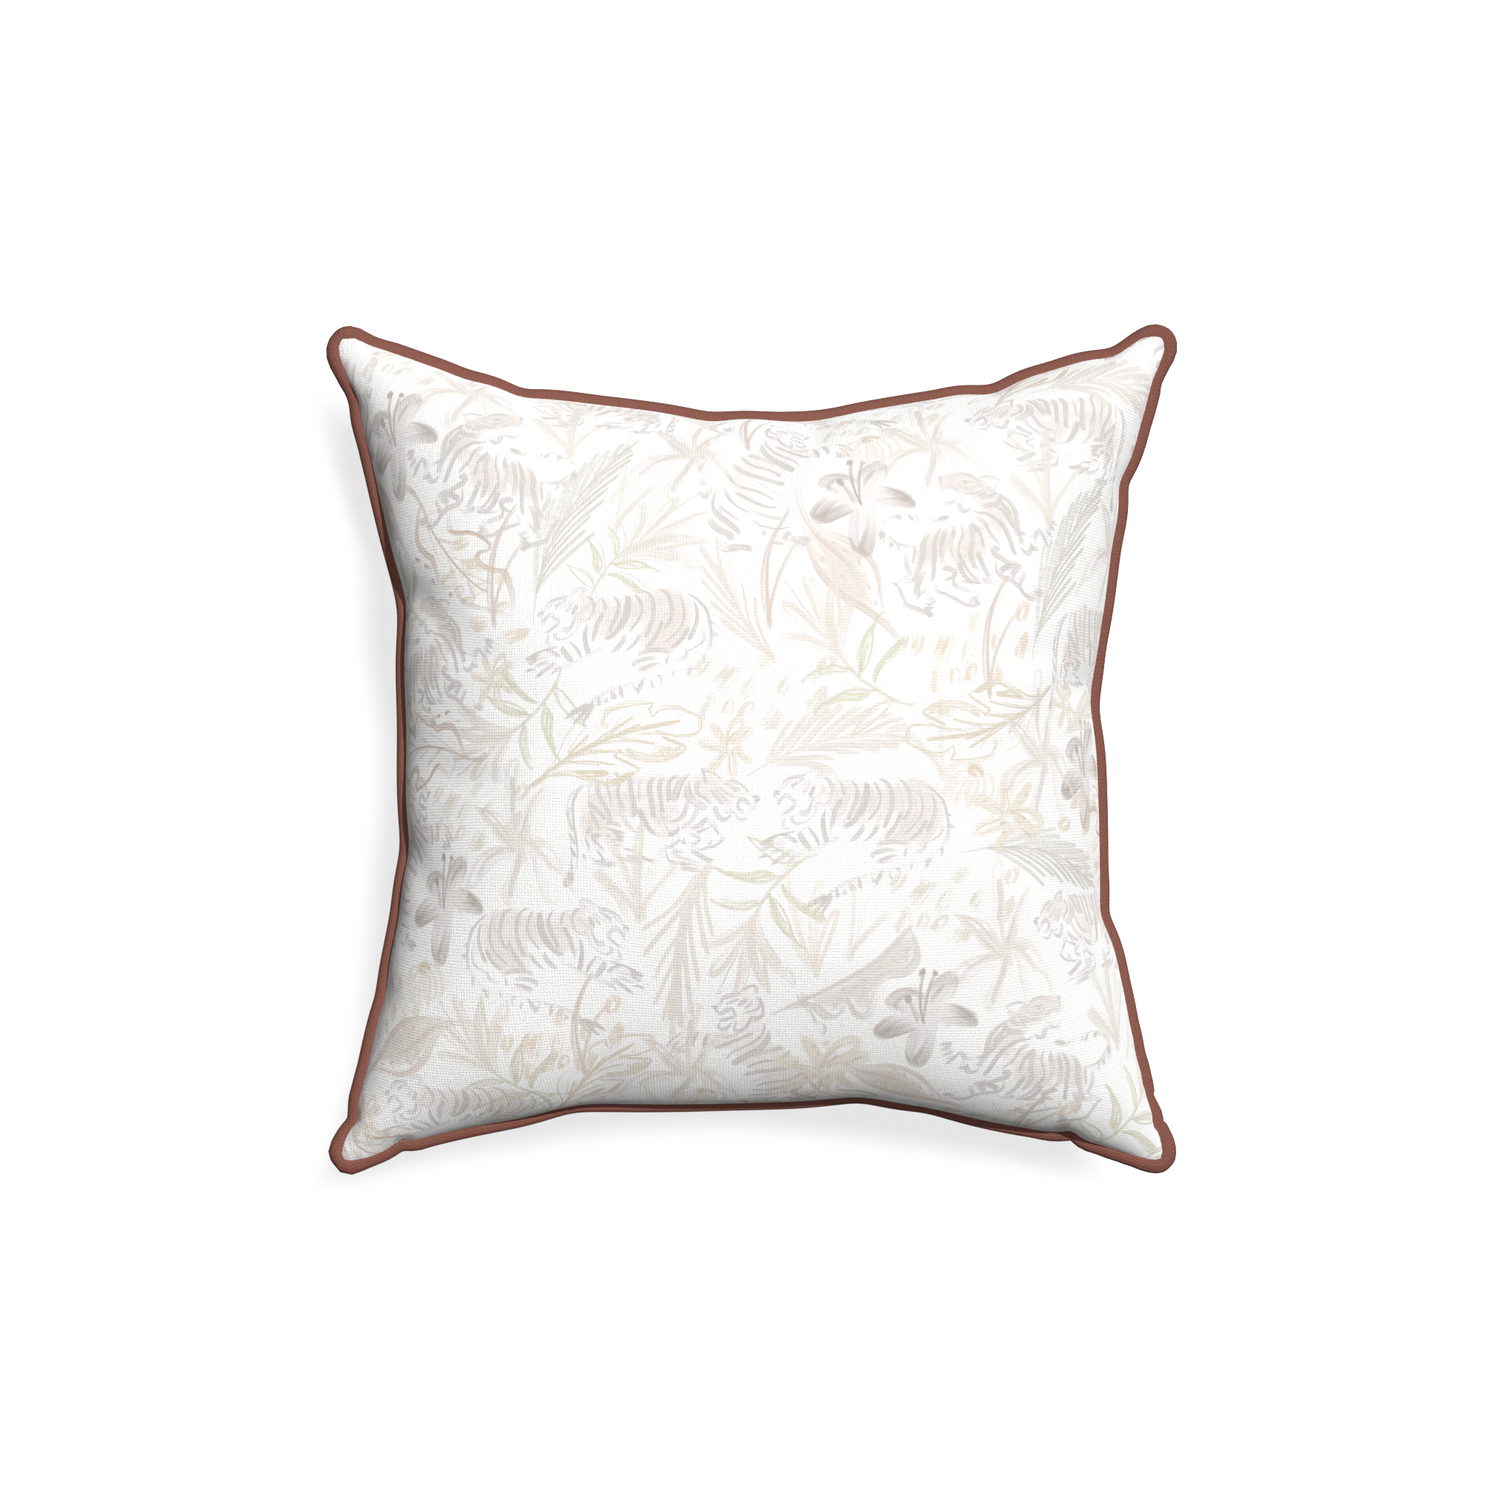 18-square frida sand custom beige chinoiserie tigerpillow with w piping on white background